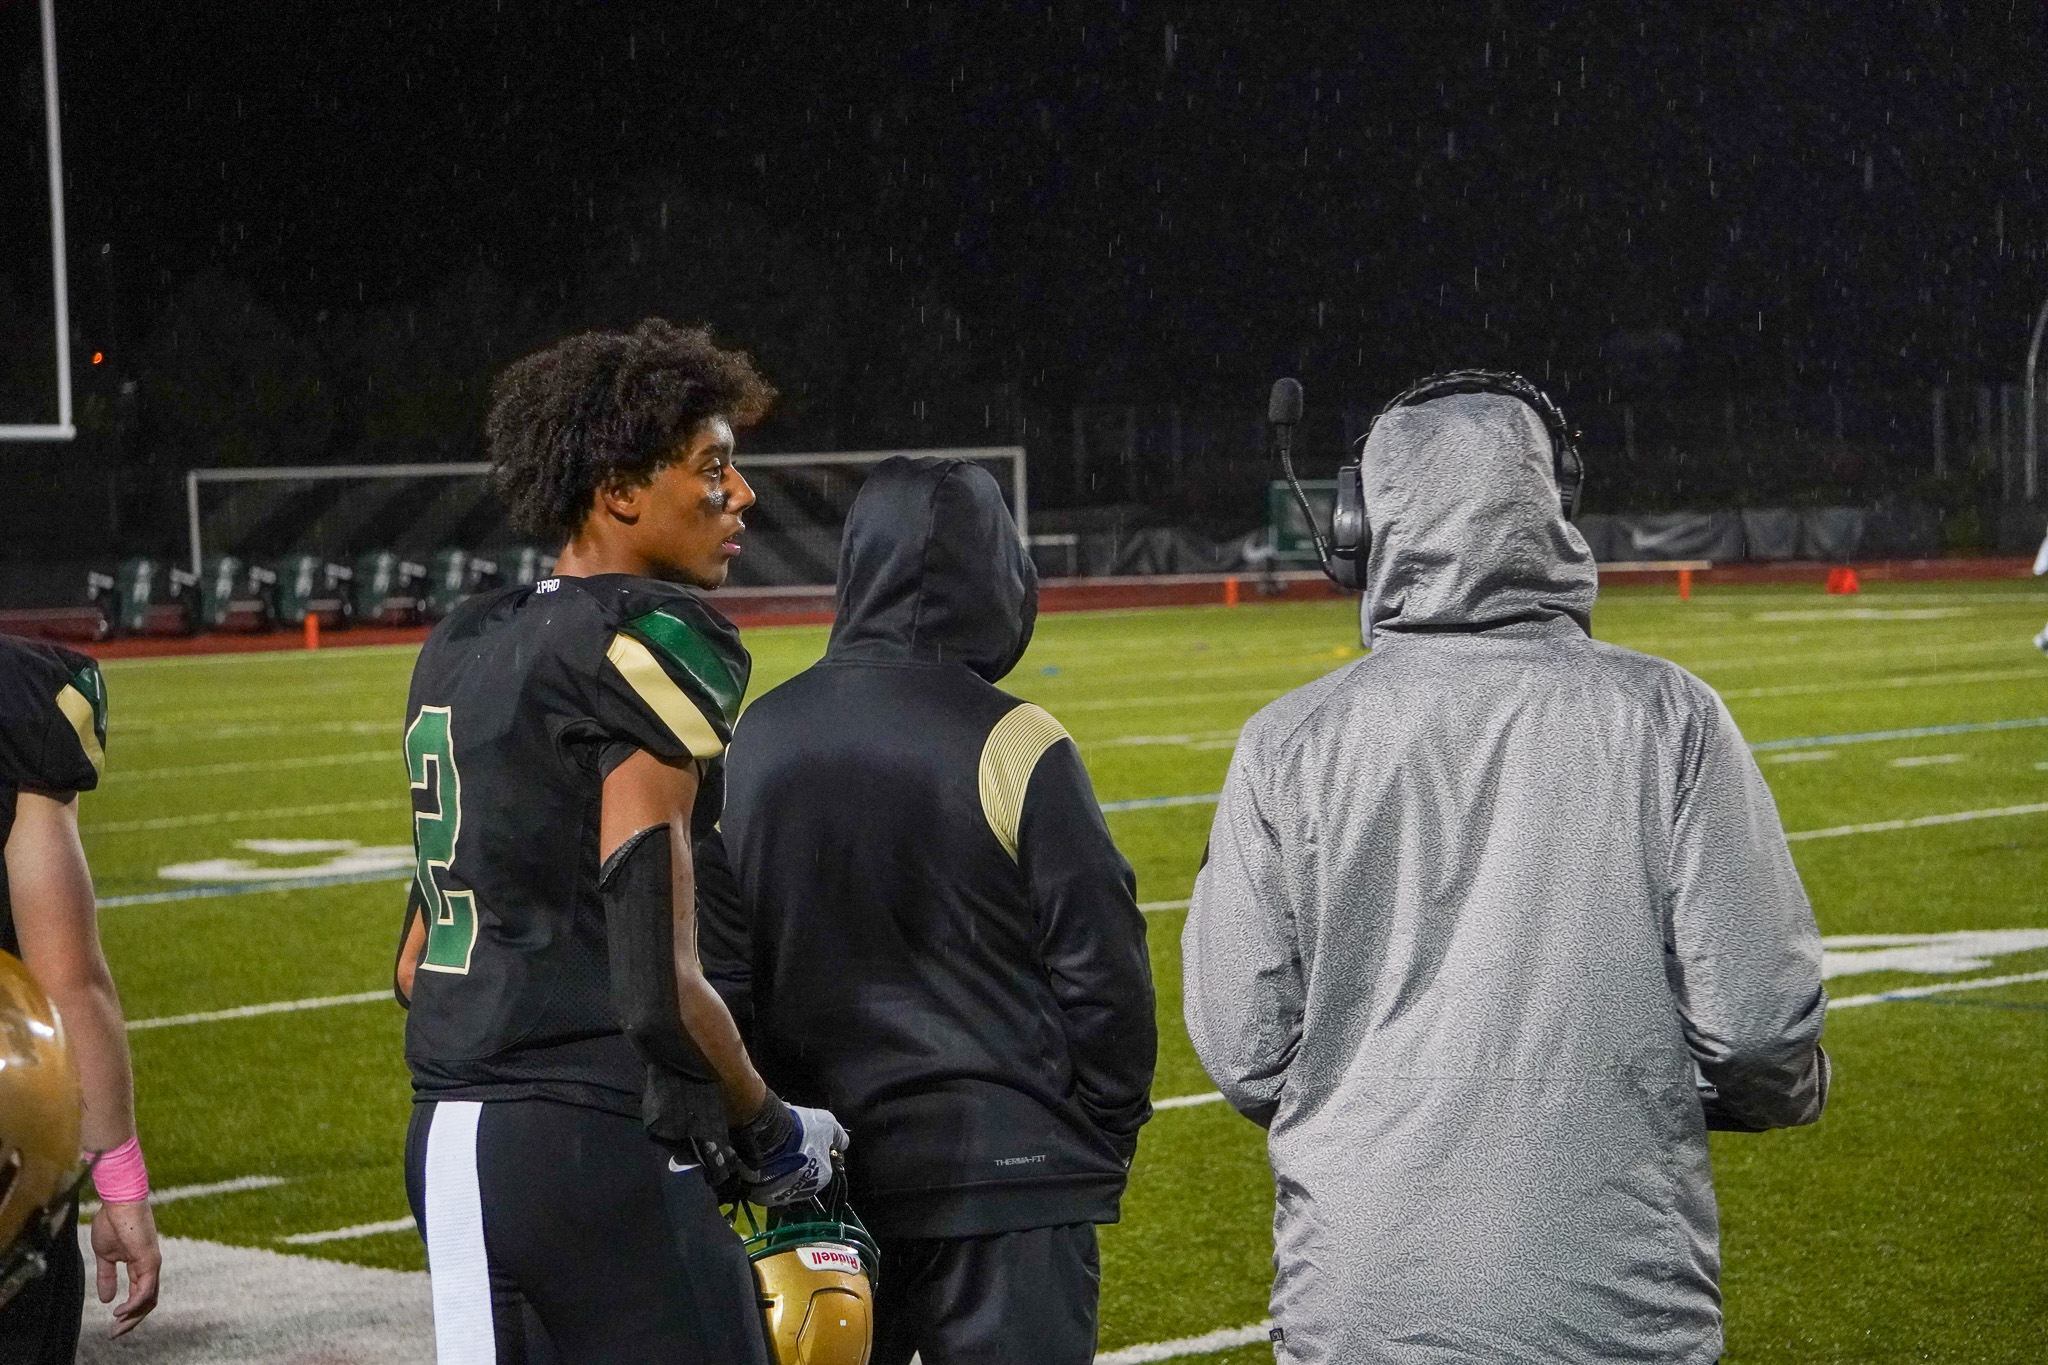 #2 Elias Johnson speaks with his coach on the sideline before entering the game.